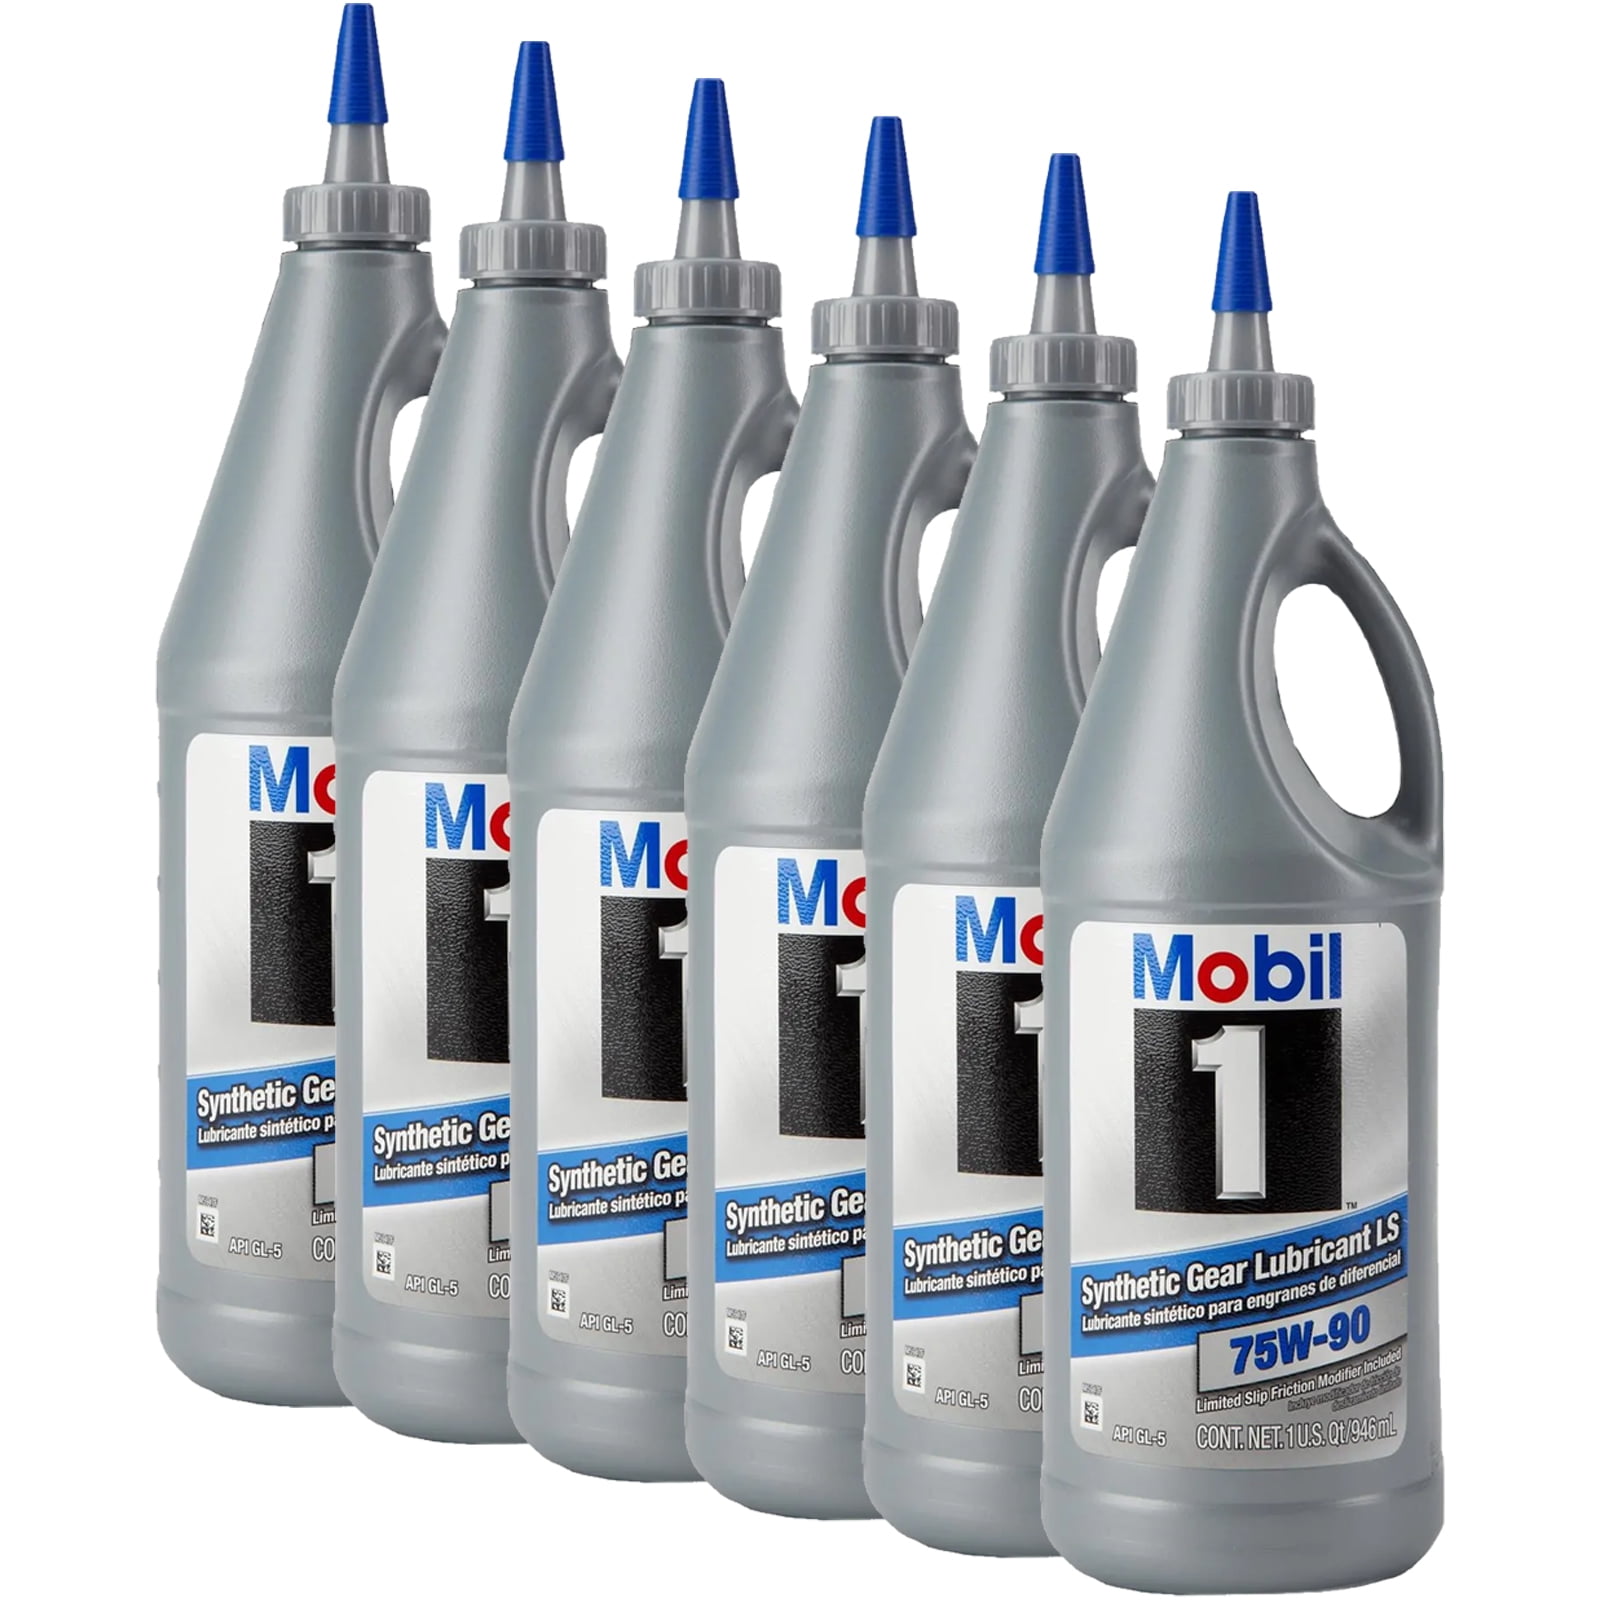 Mobil1 1043611 Full Synthetic Gear Lubricant, 75W-90 Quart 6 PK Super Tech Full Synthetic Gear Lubricant 75w 90